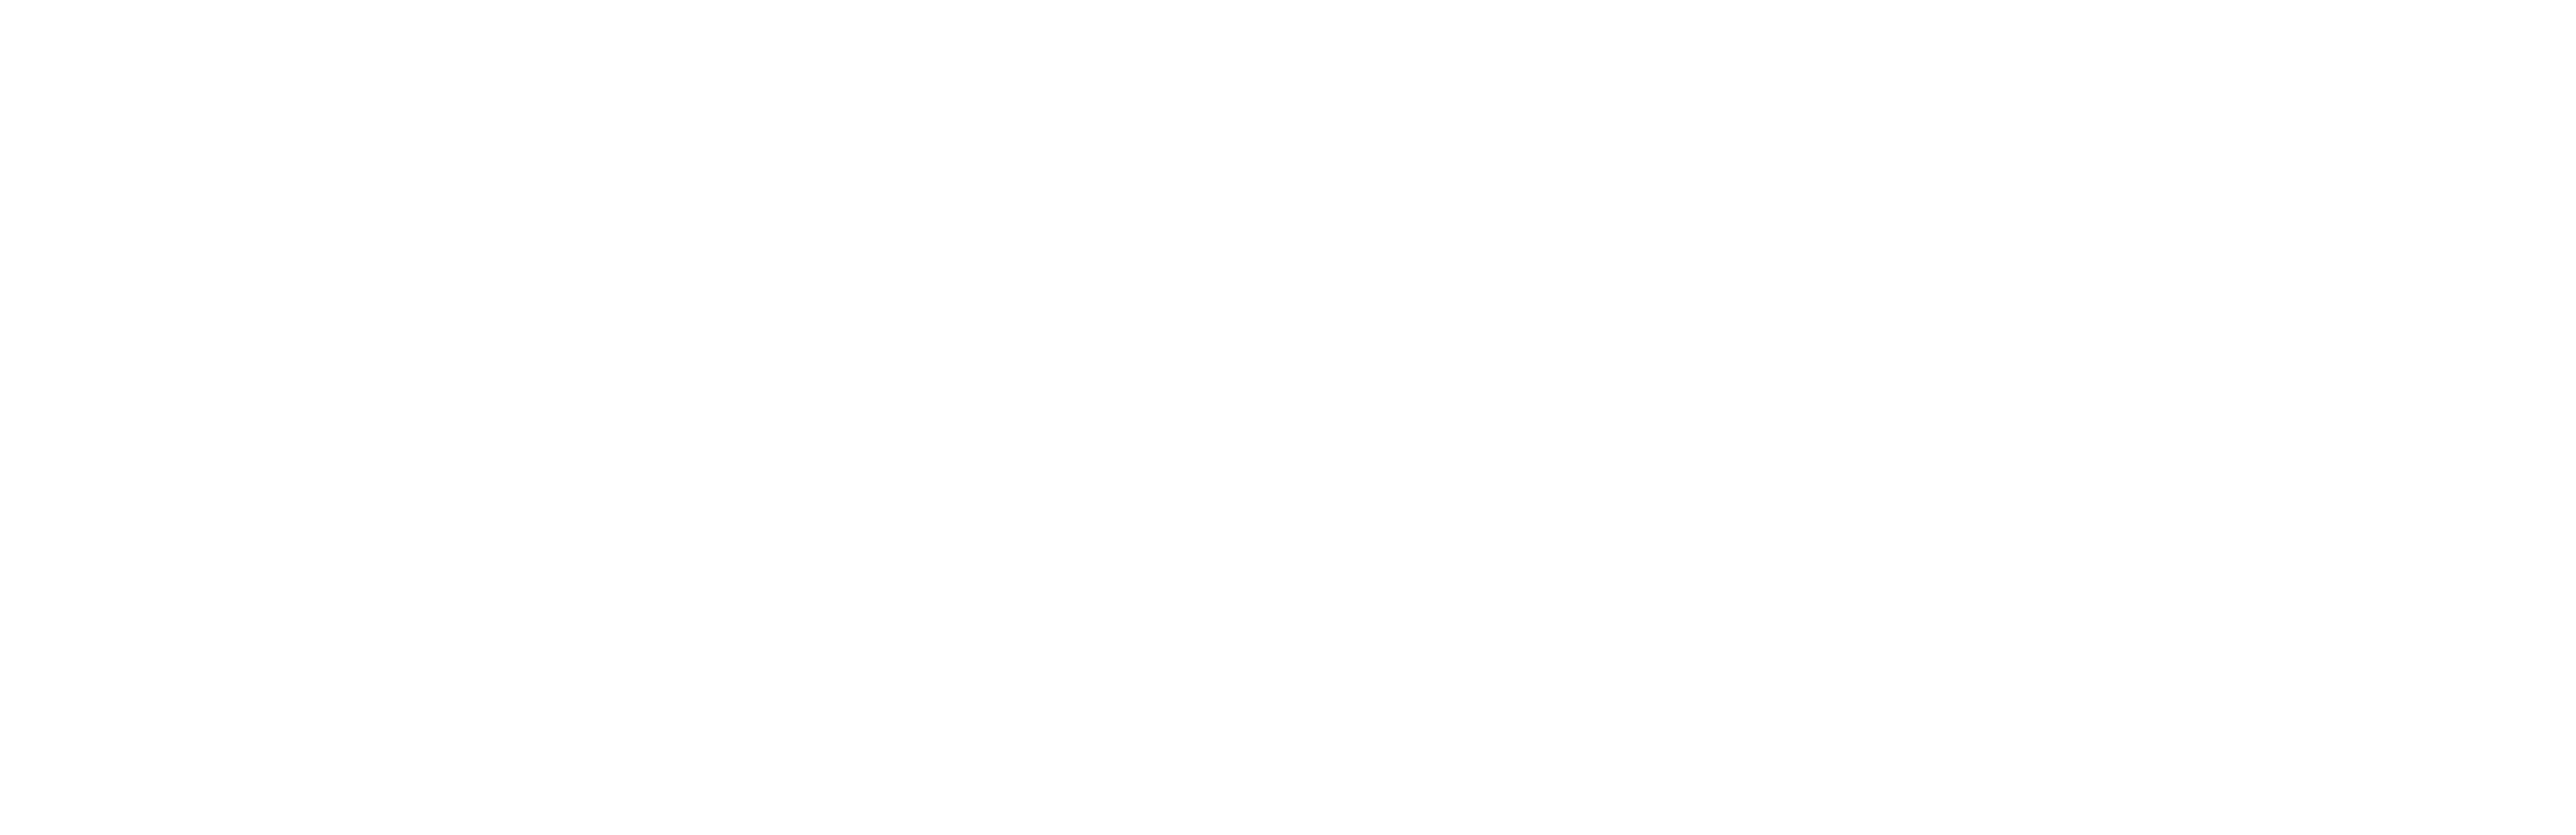 Banksy and the Rise of Outlaw Art logo